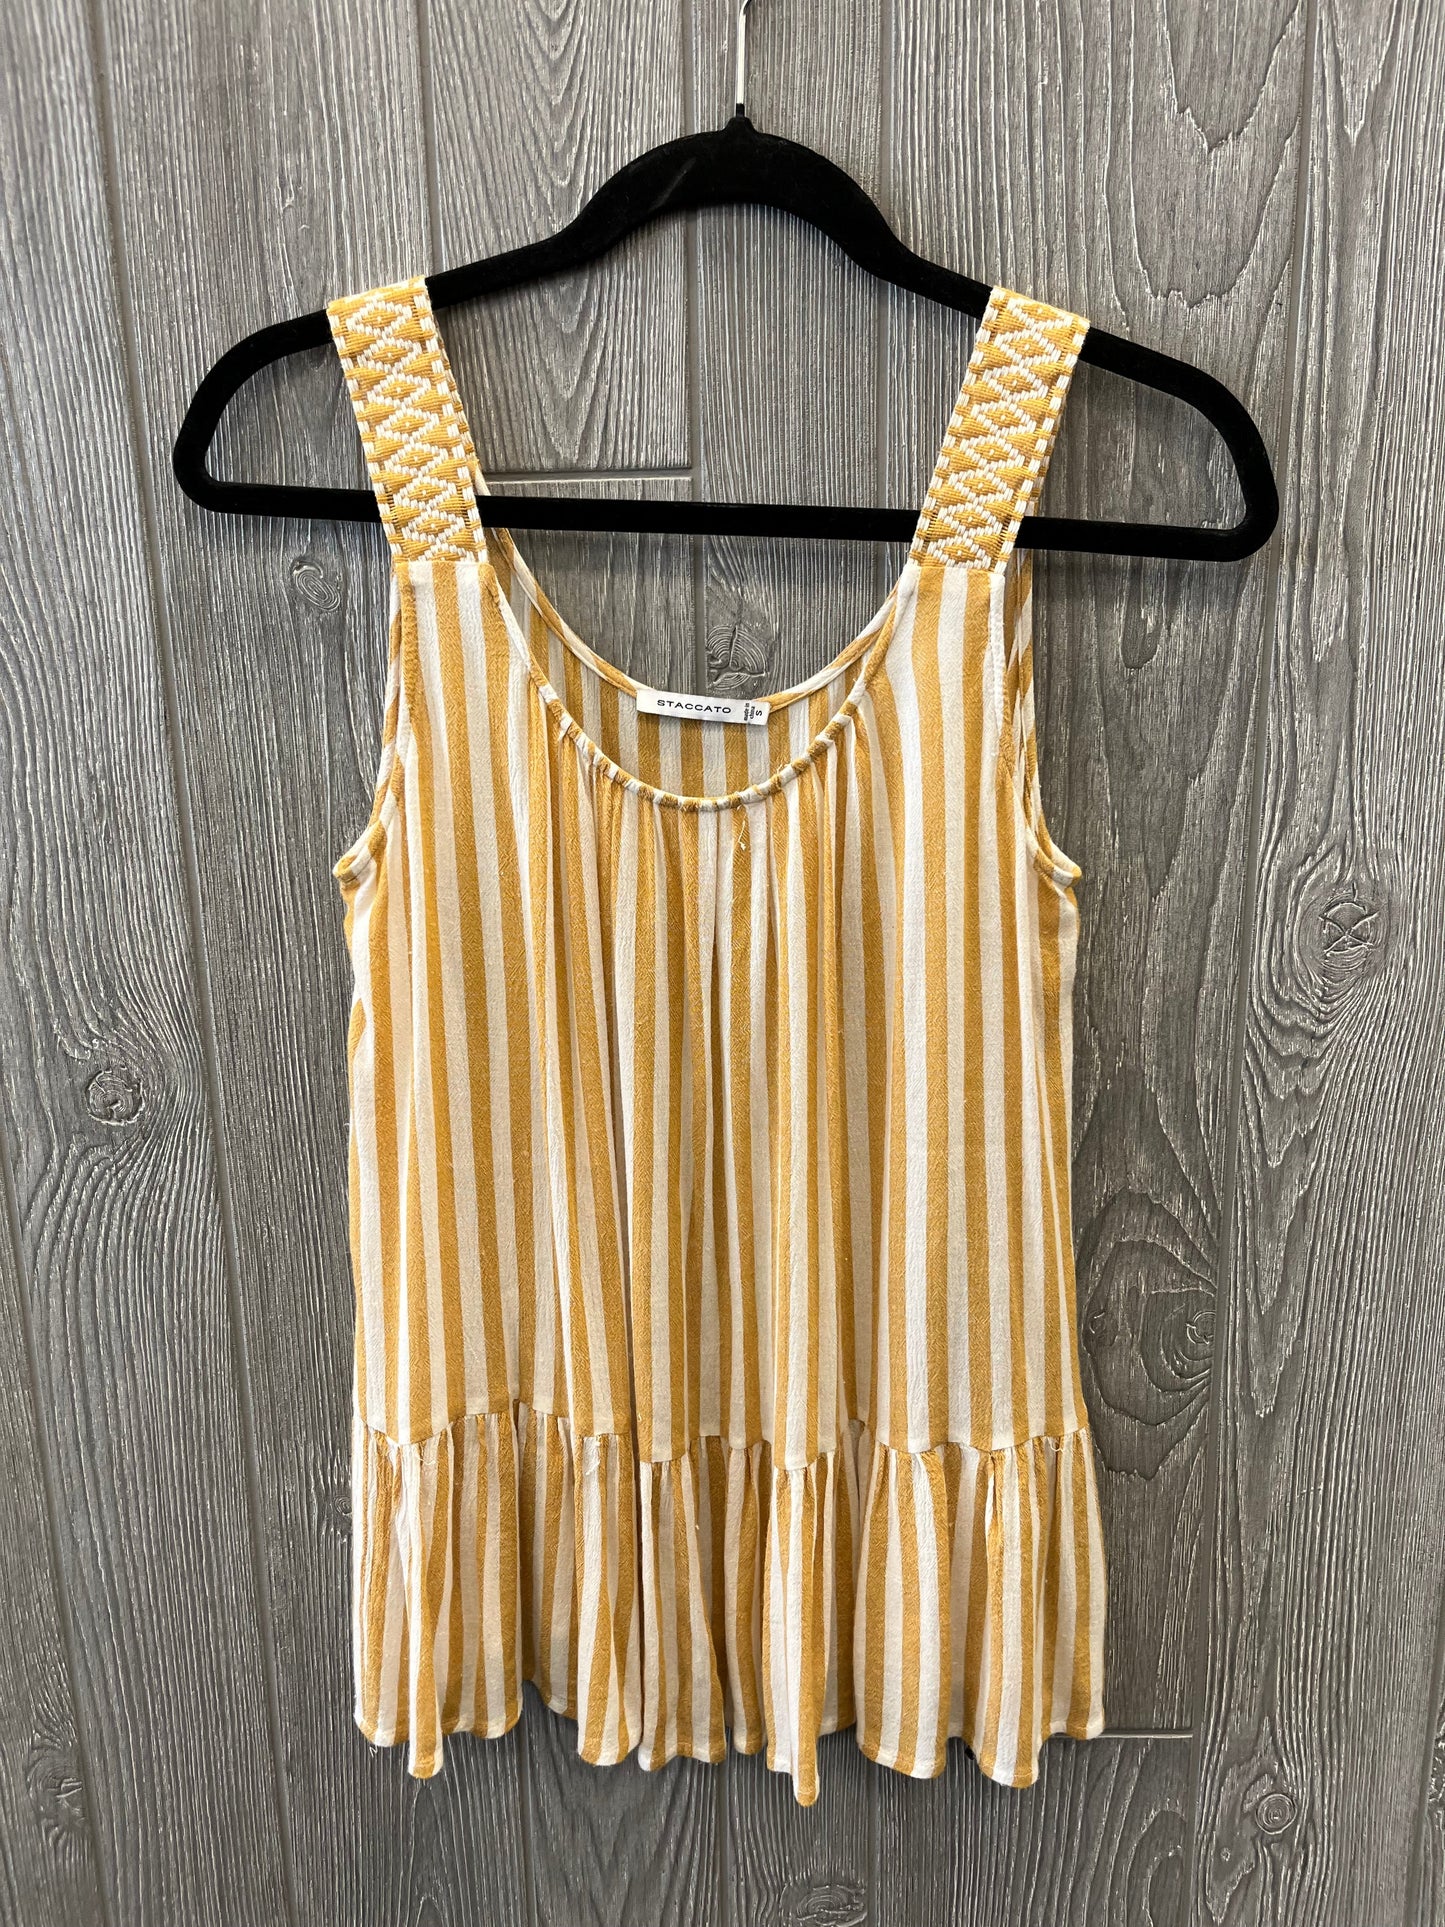 Striped Pattern Top Sleeveless Staccato, Size S